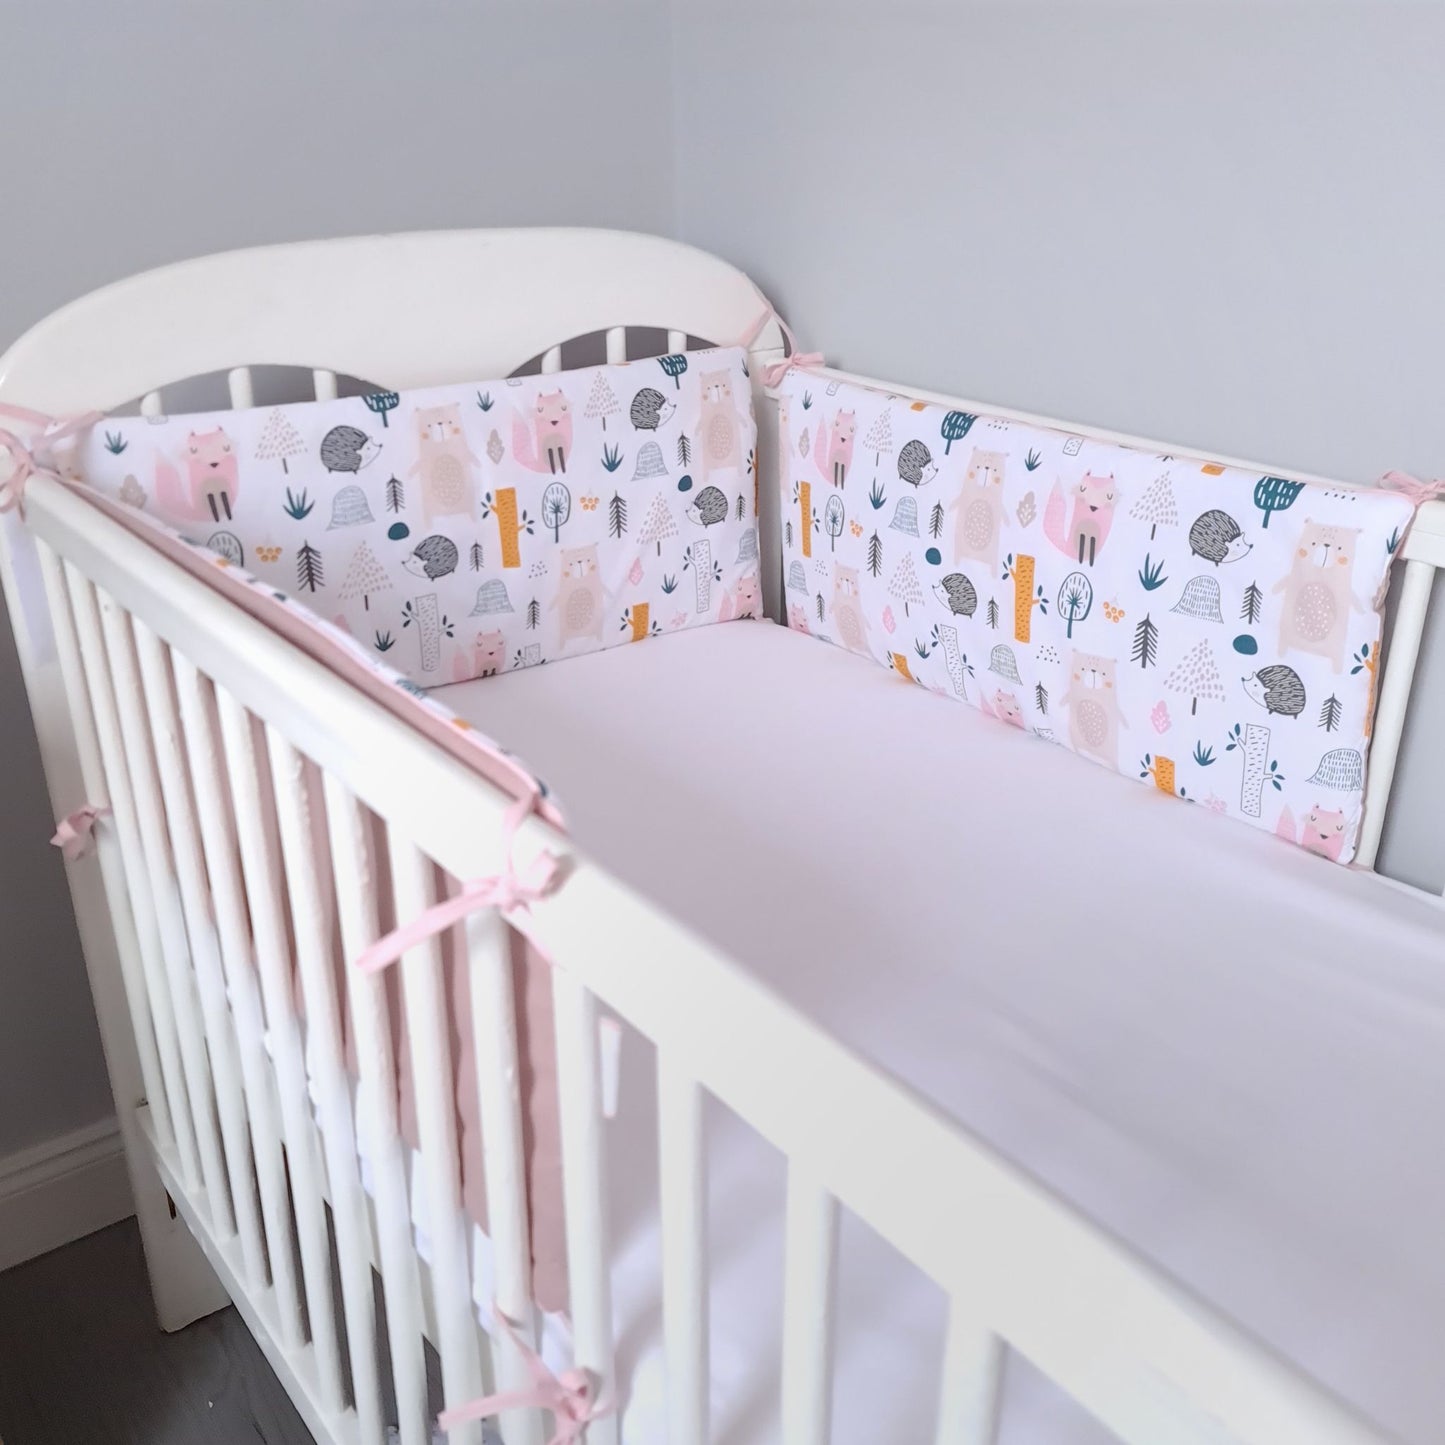 cot bed protector bumpers set for bed crib lining